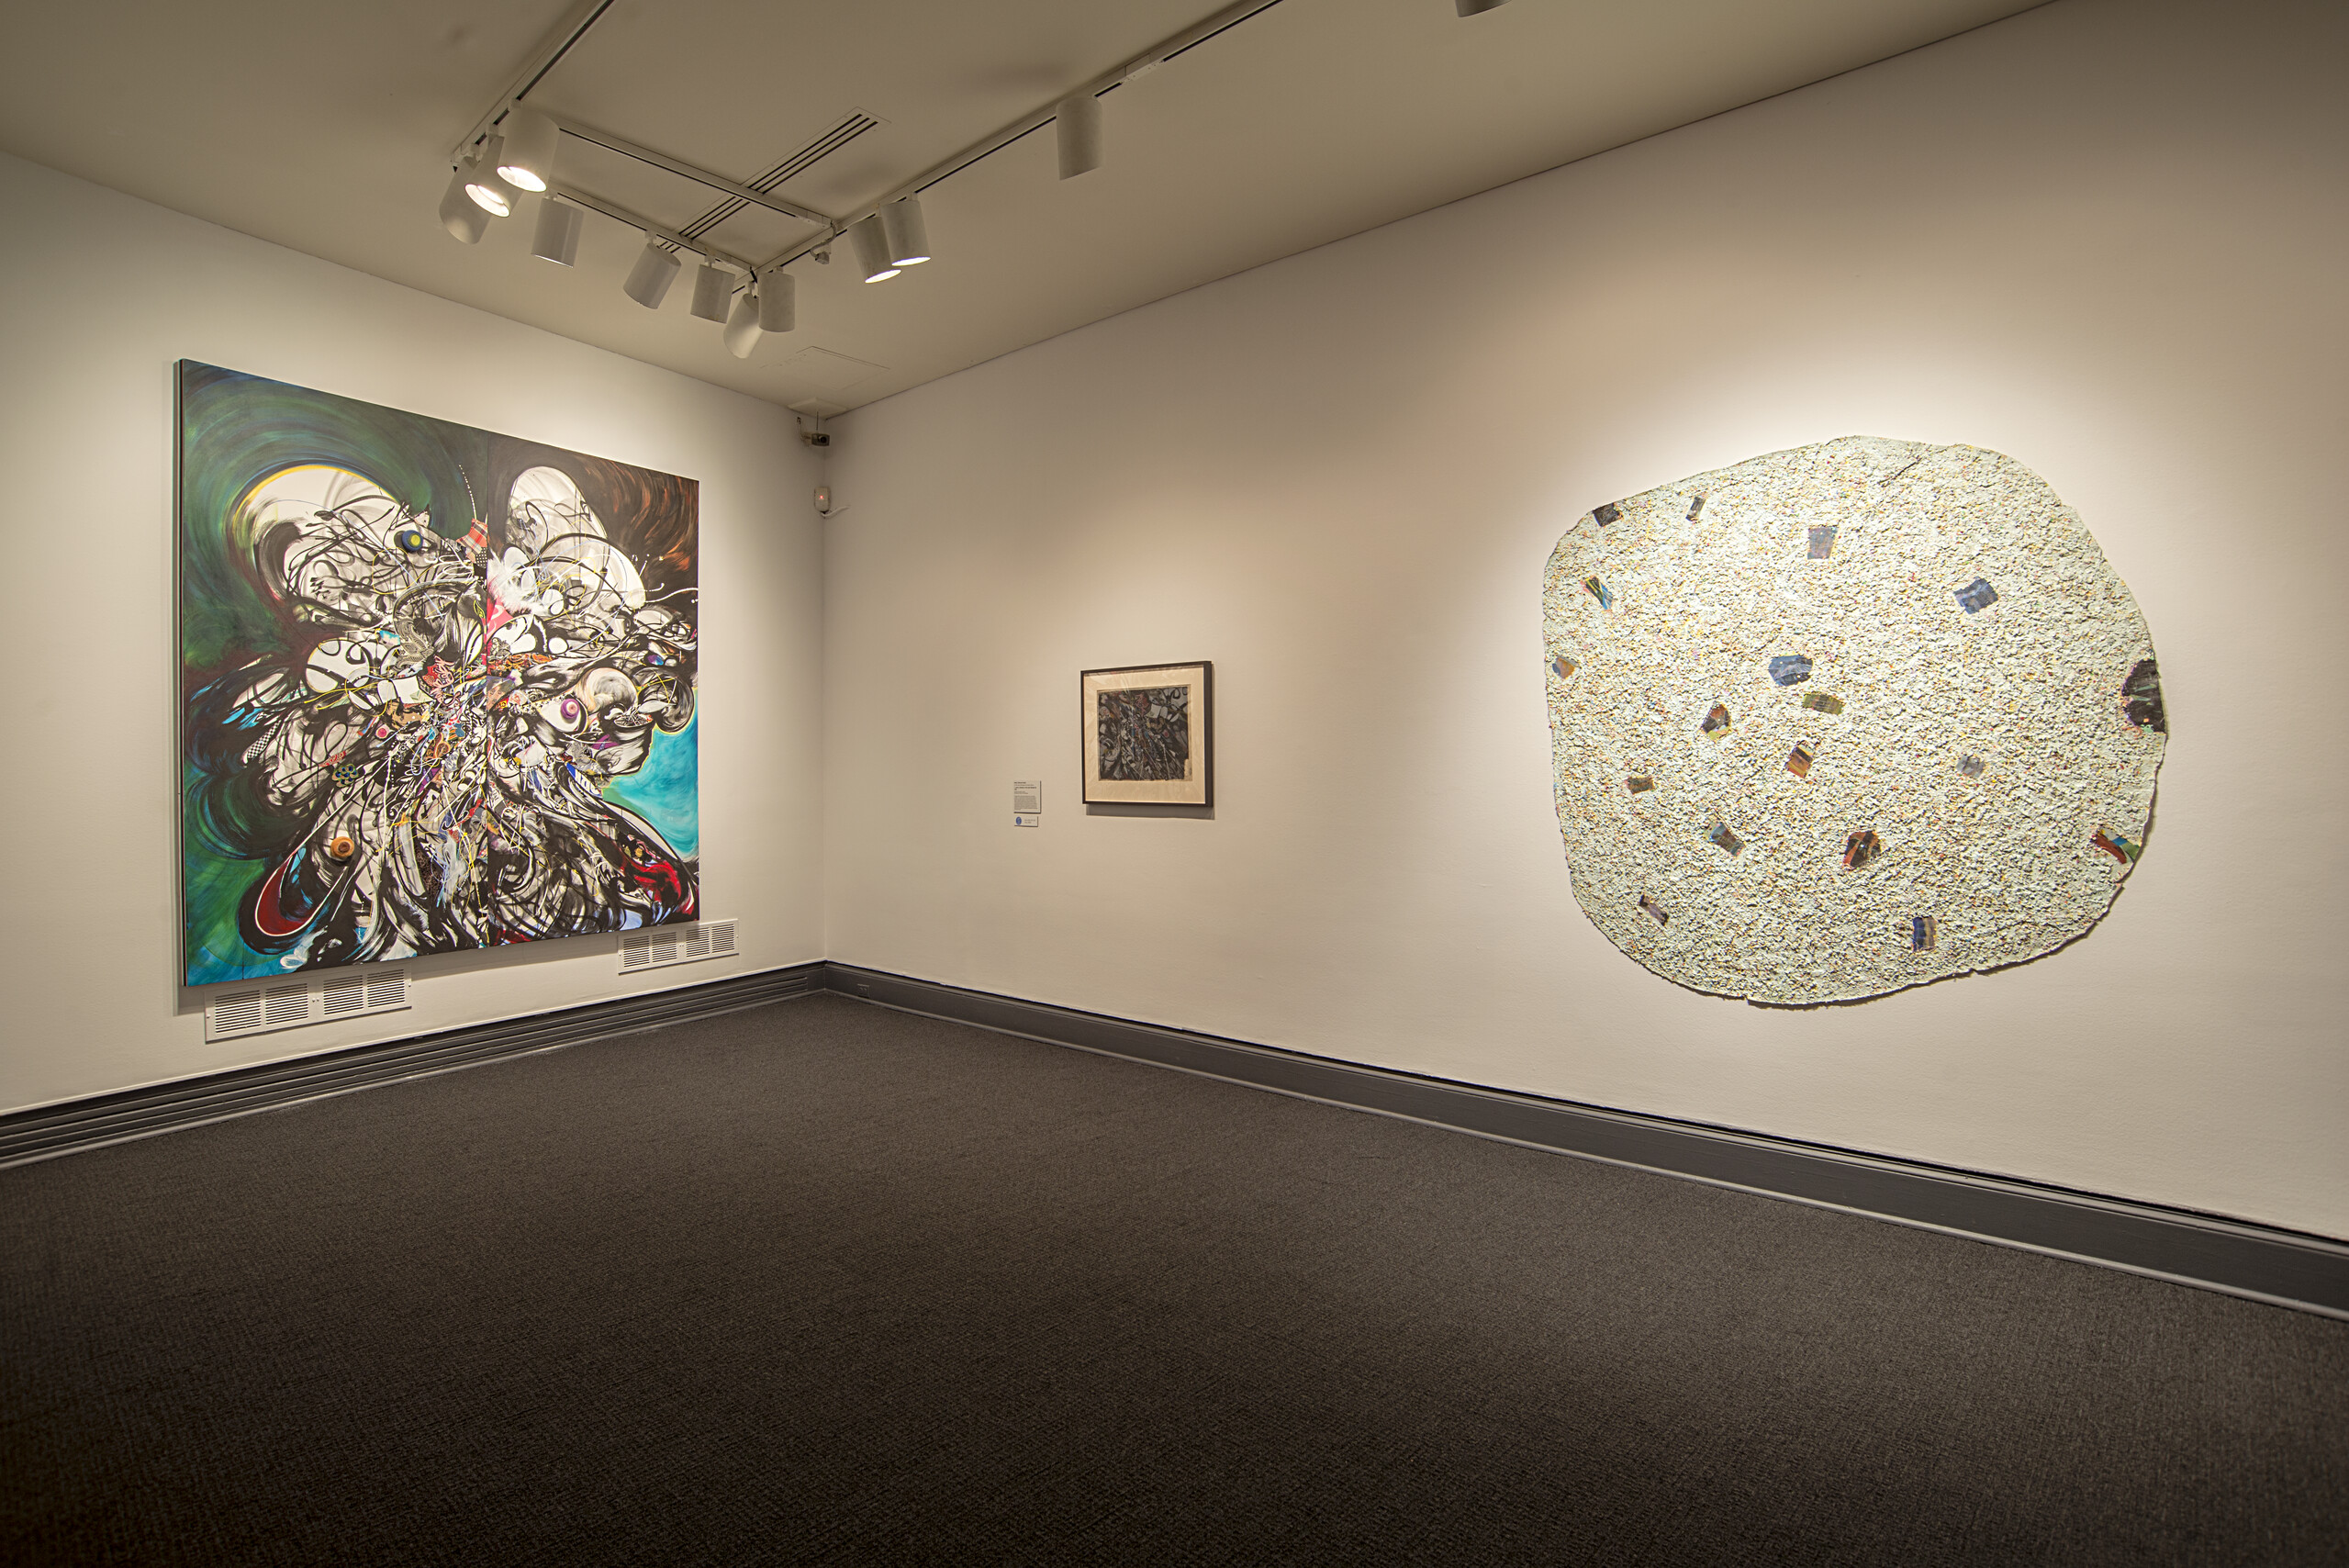 An installation view of several abstract artworks hung on a gallery wall.